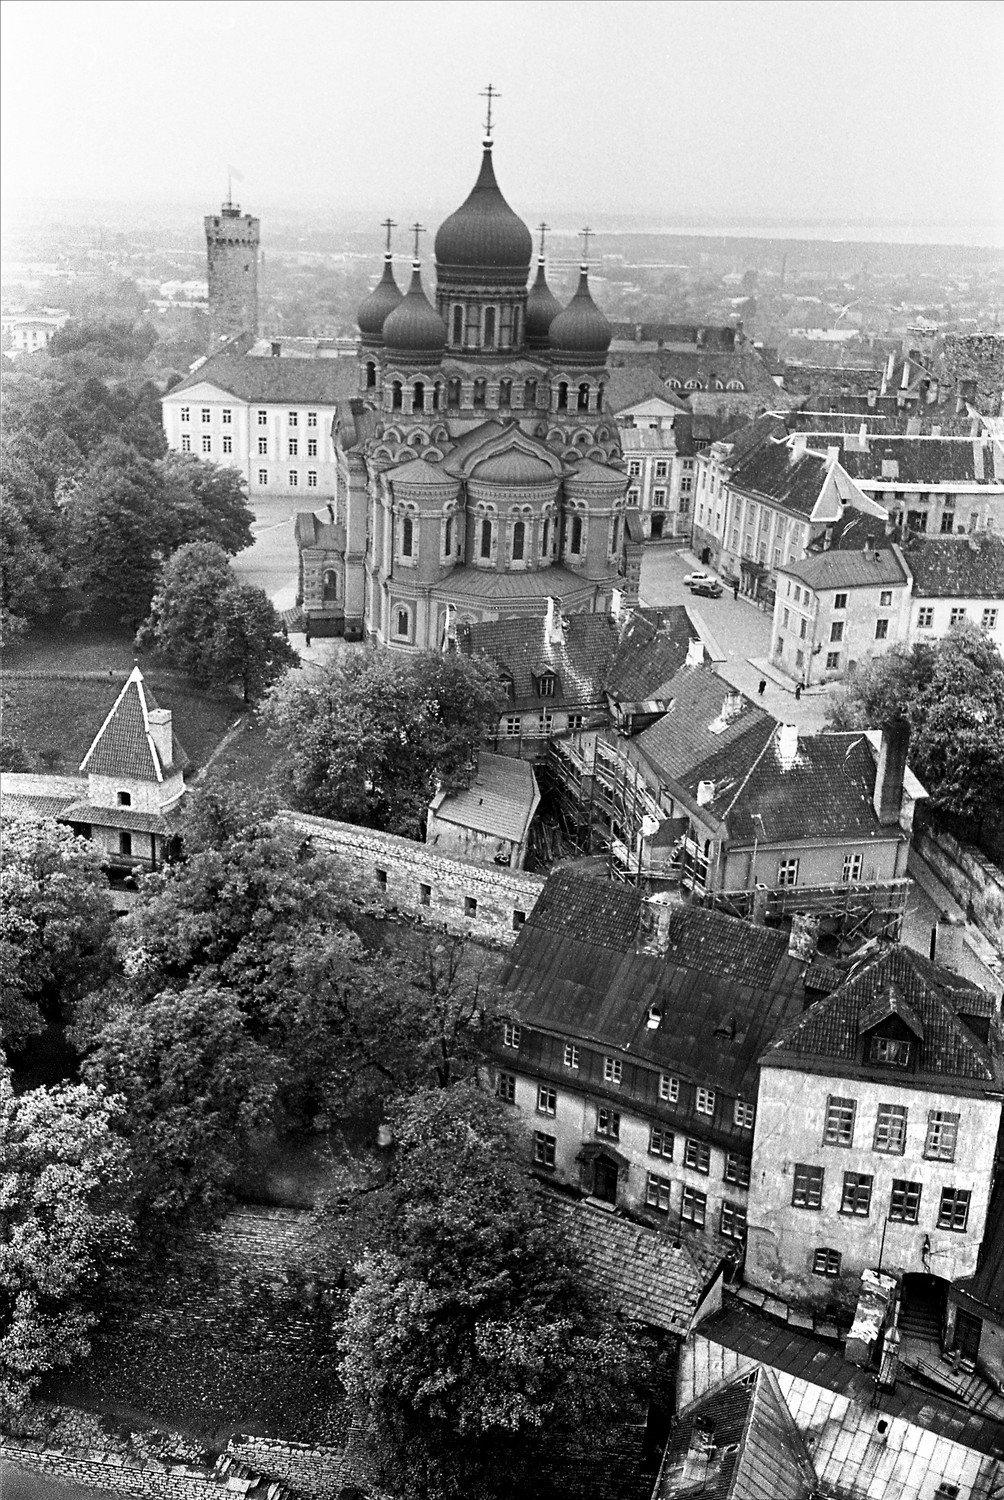 Aleksander Nevski Cathedral and the city wall from the tower of the Niguliste Church 74